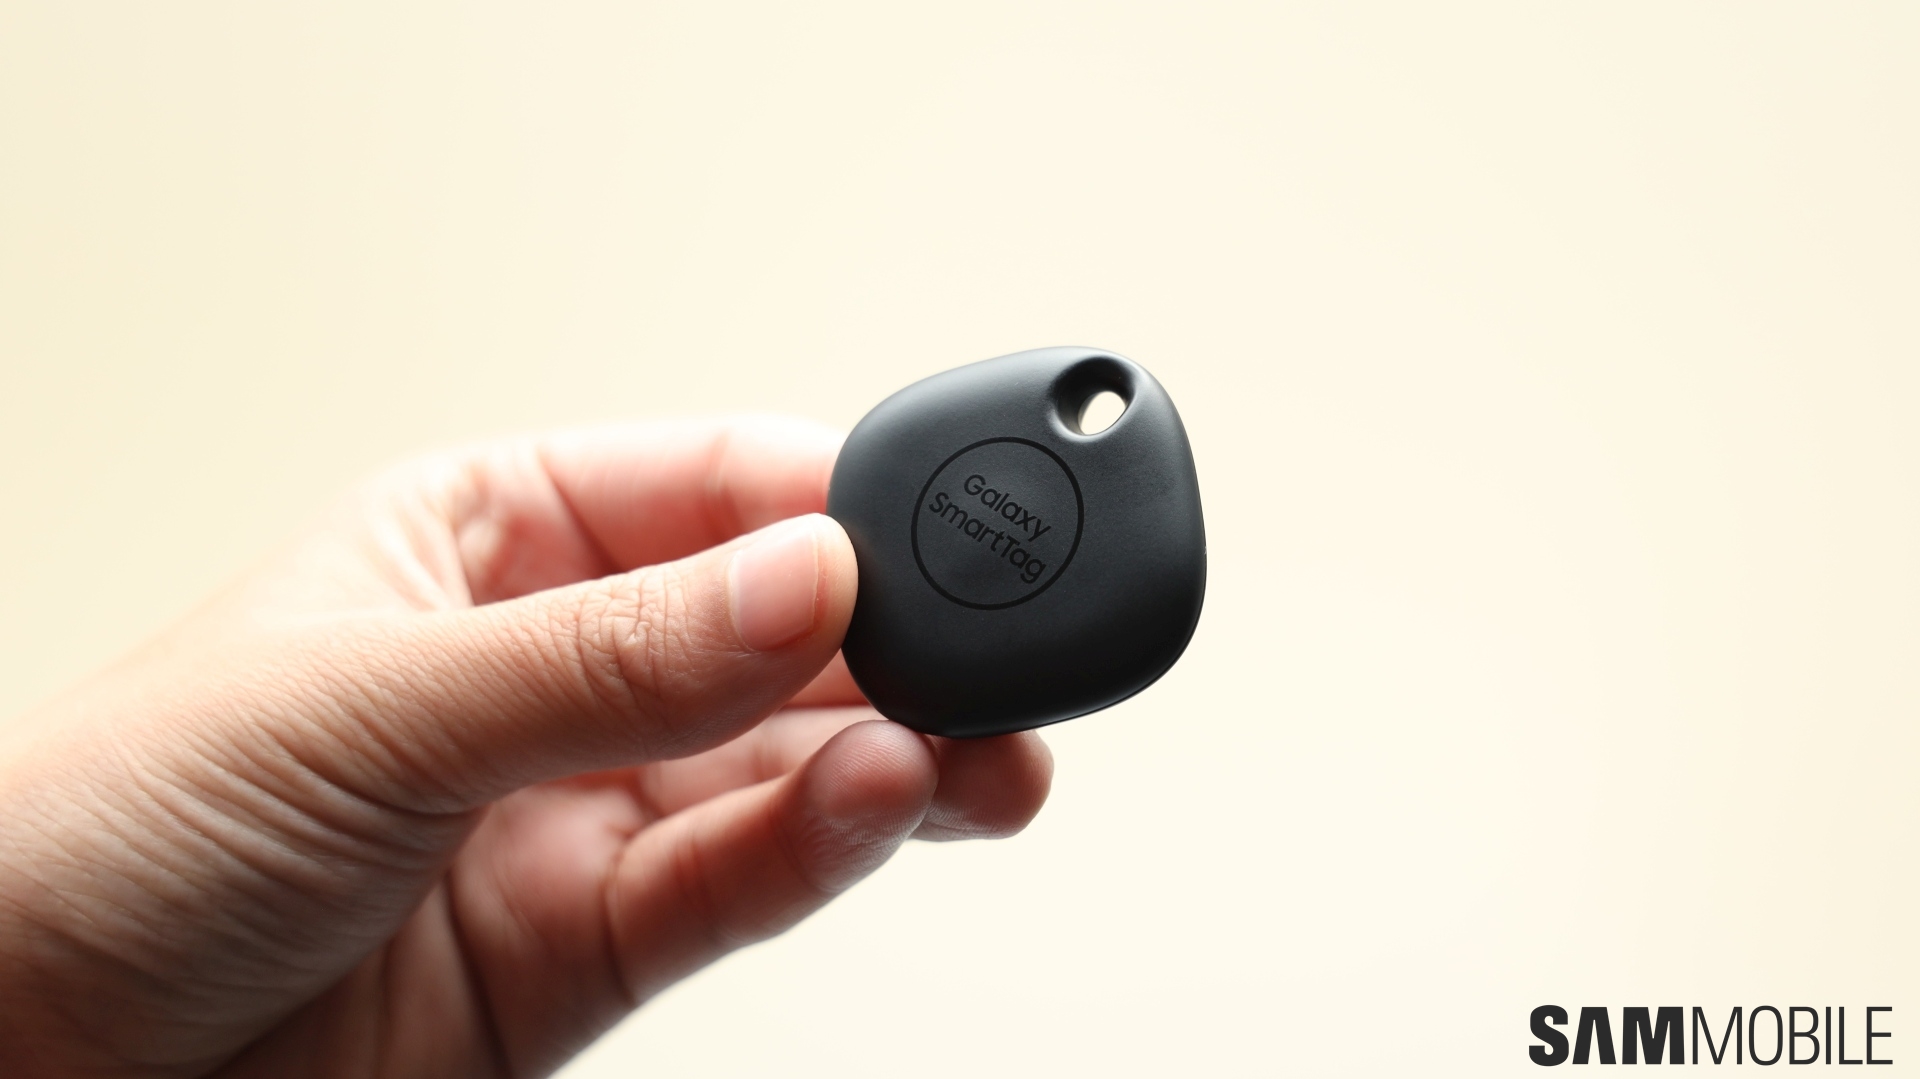 Samsung Galaxy Smart Tag review: Off track - Reviewed